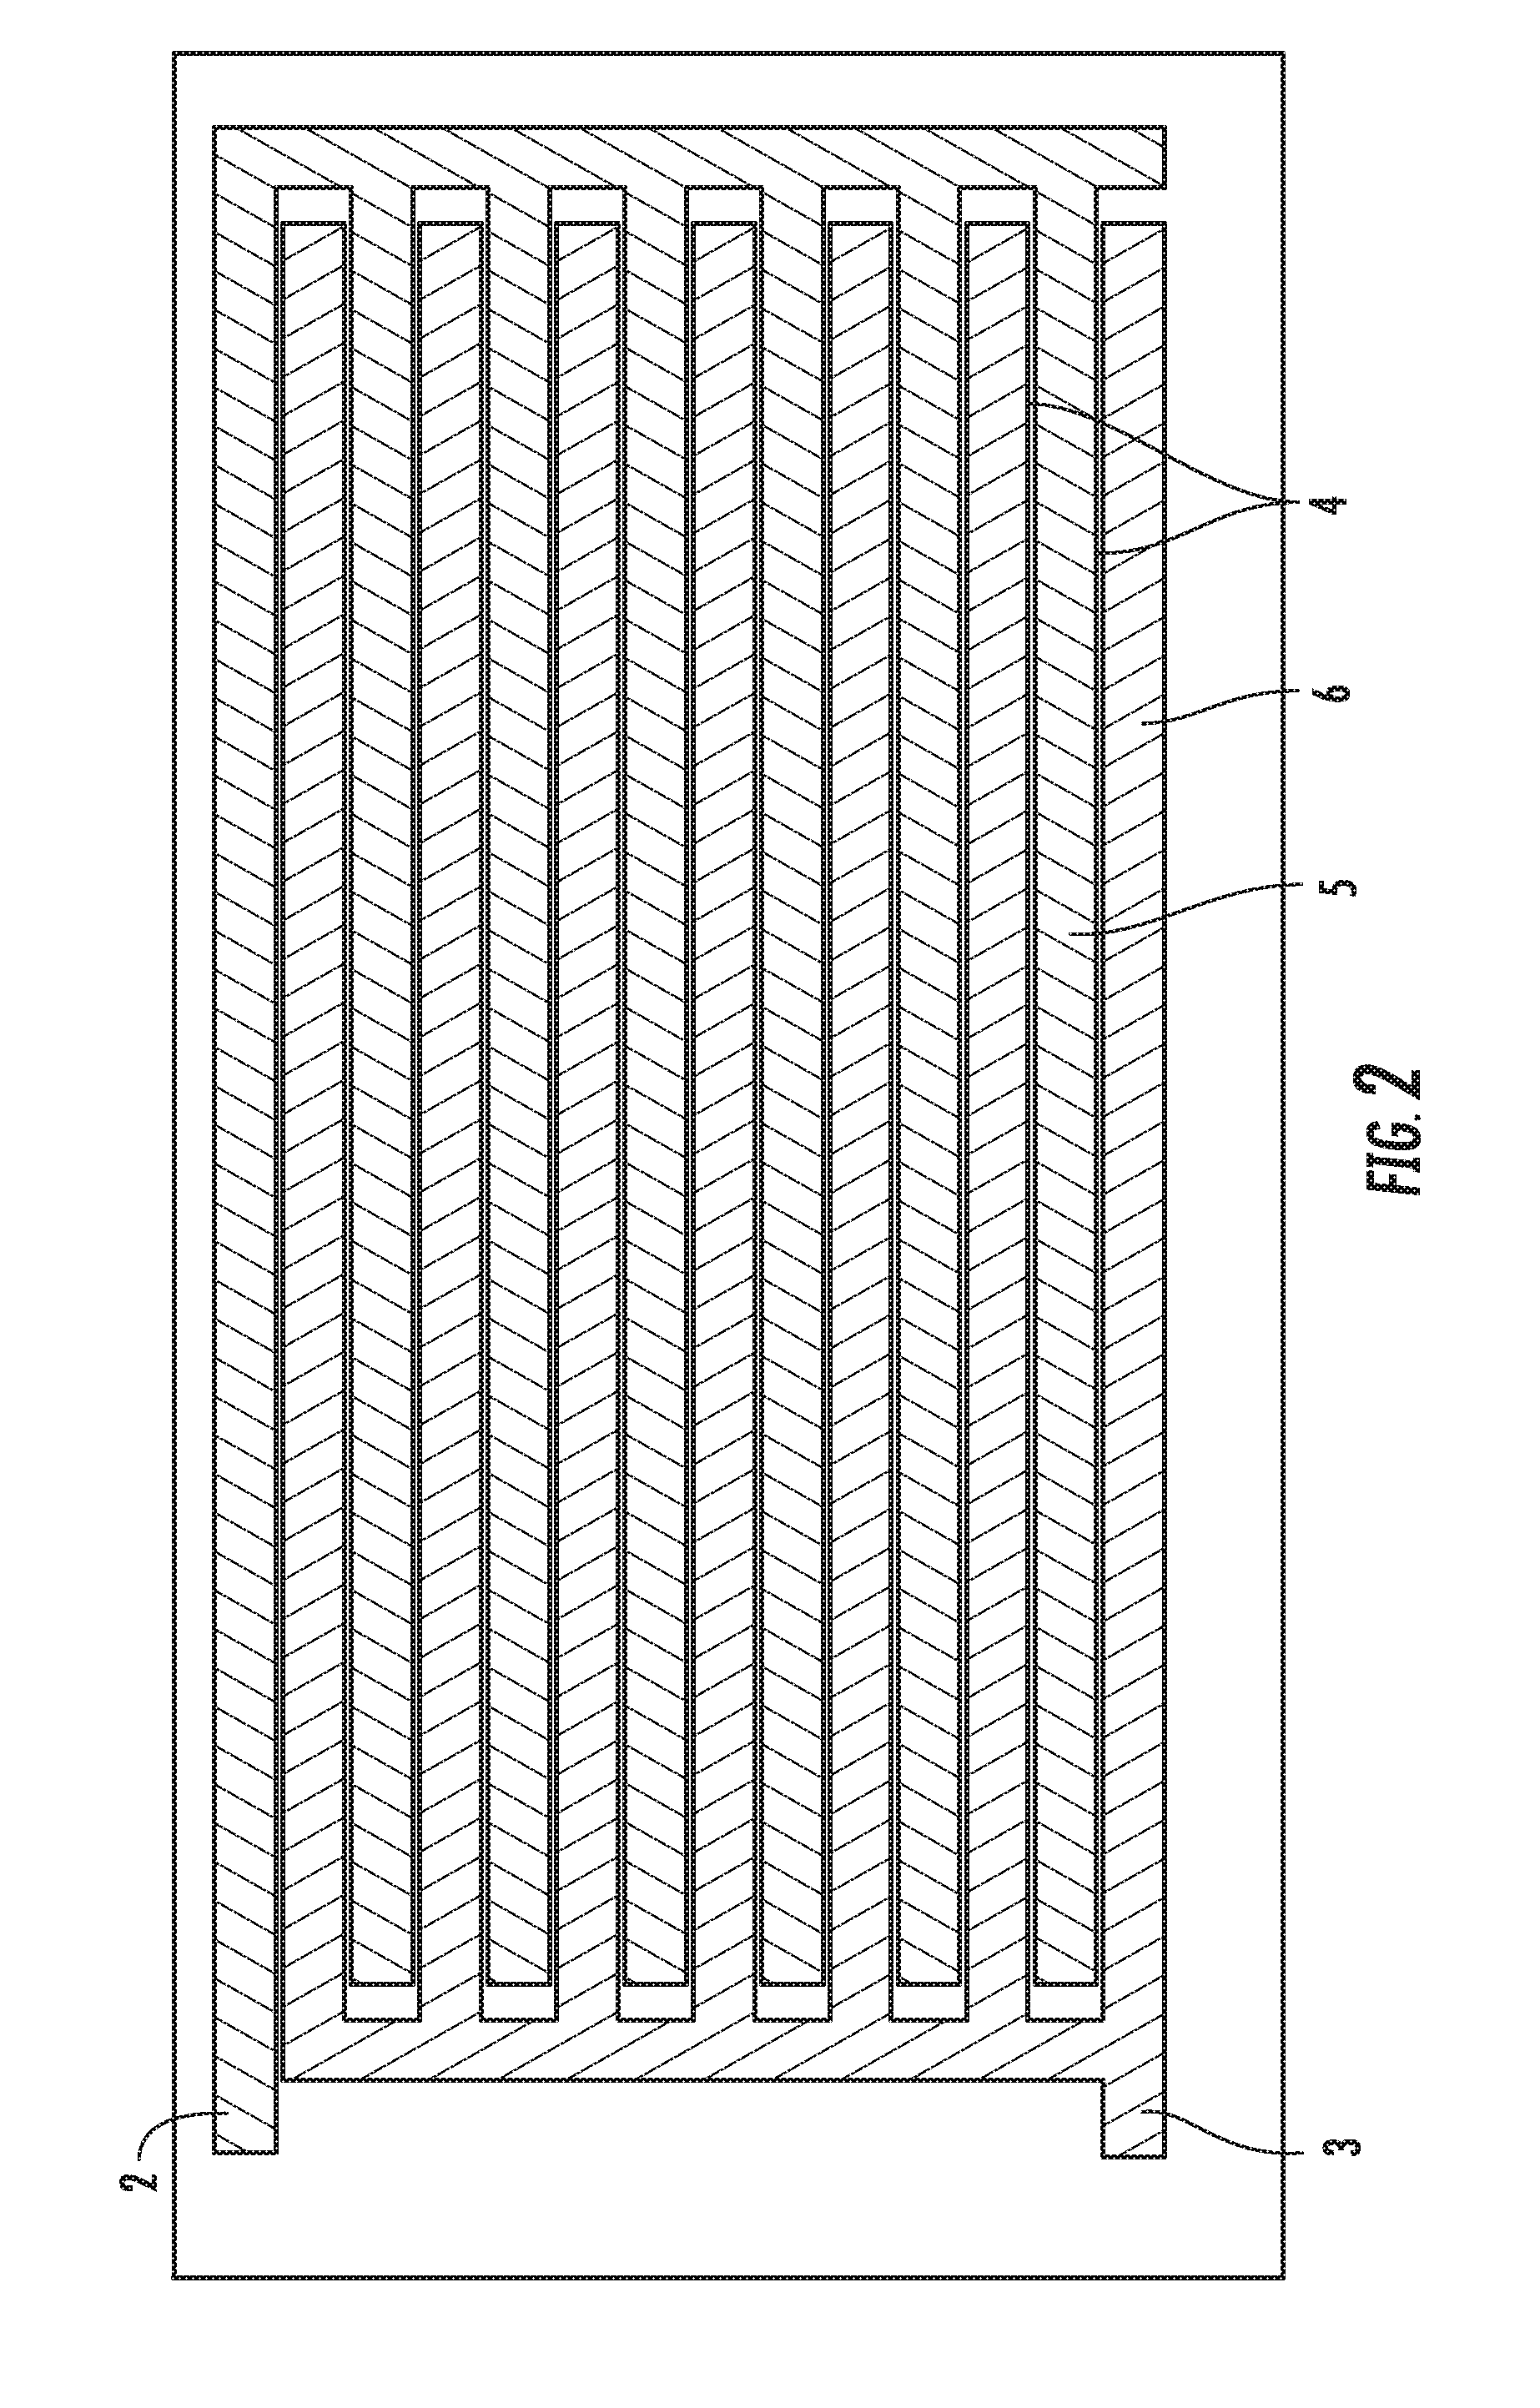 Modular interdigitated back contact photovoltaic cell structure on opaque substrate and fabrication process